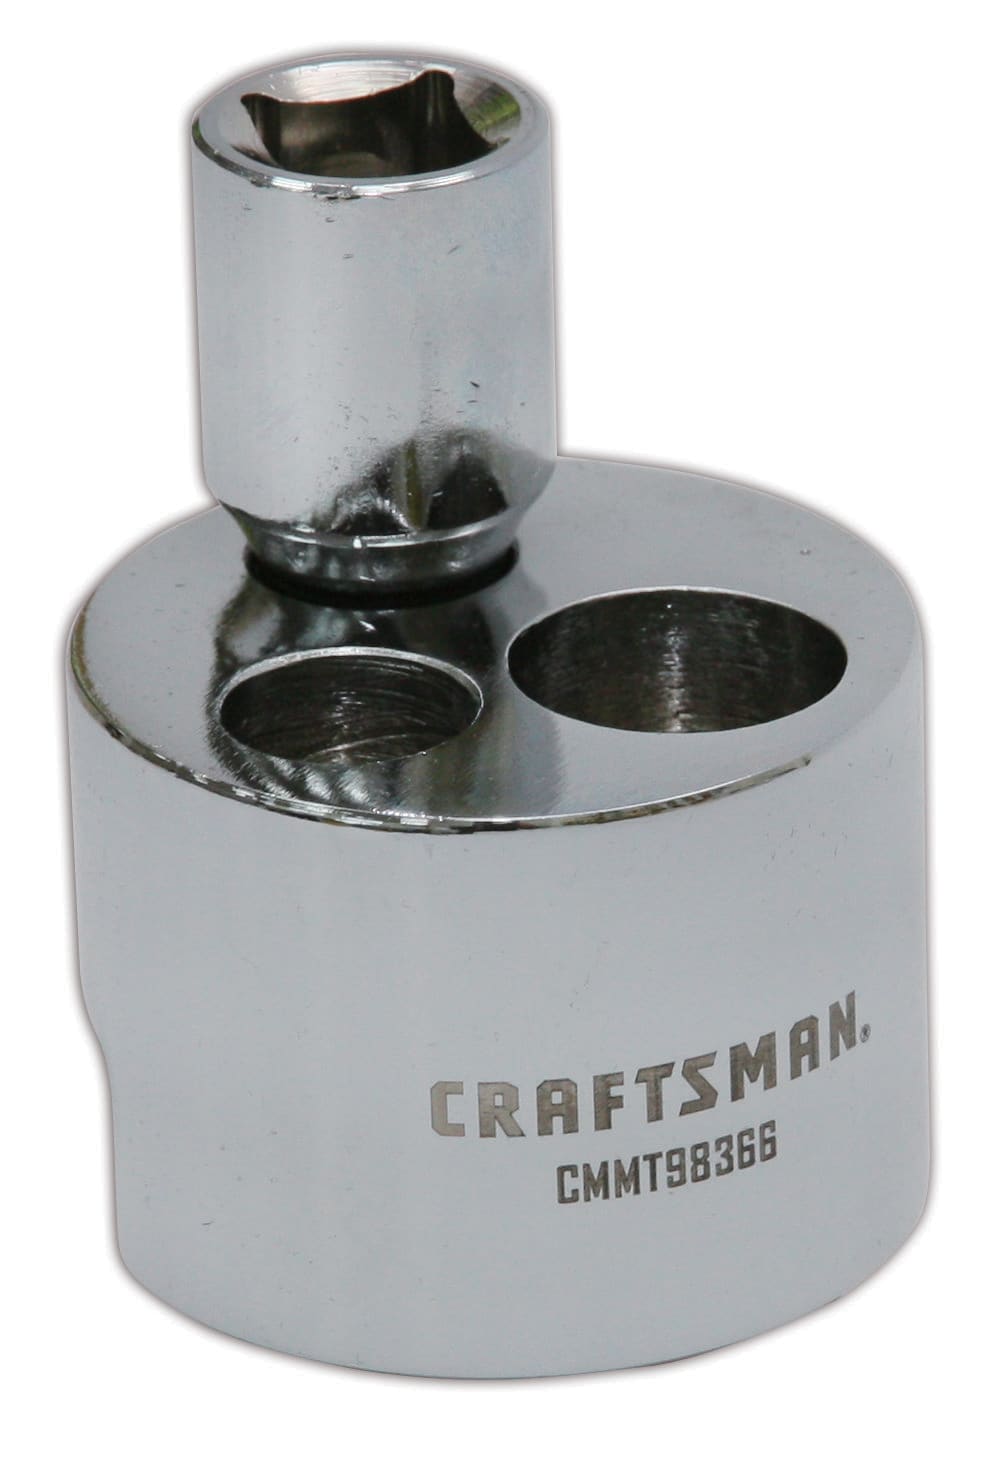 CRAFTSMAN Automotive Nut Cracker in the Automotive Hand Tools department at